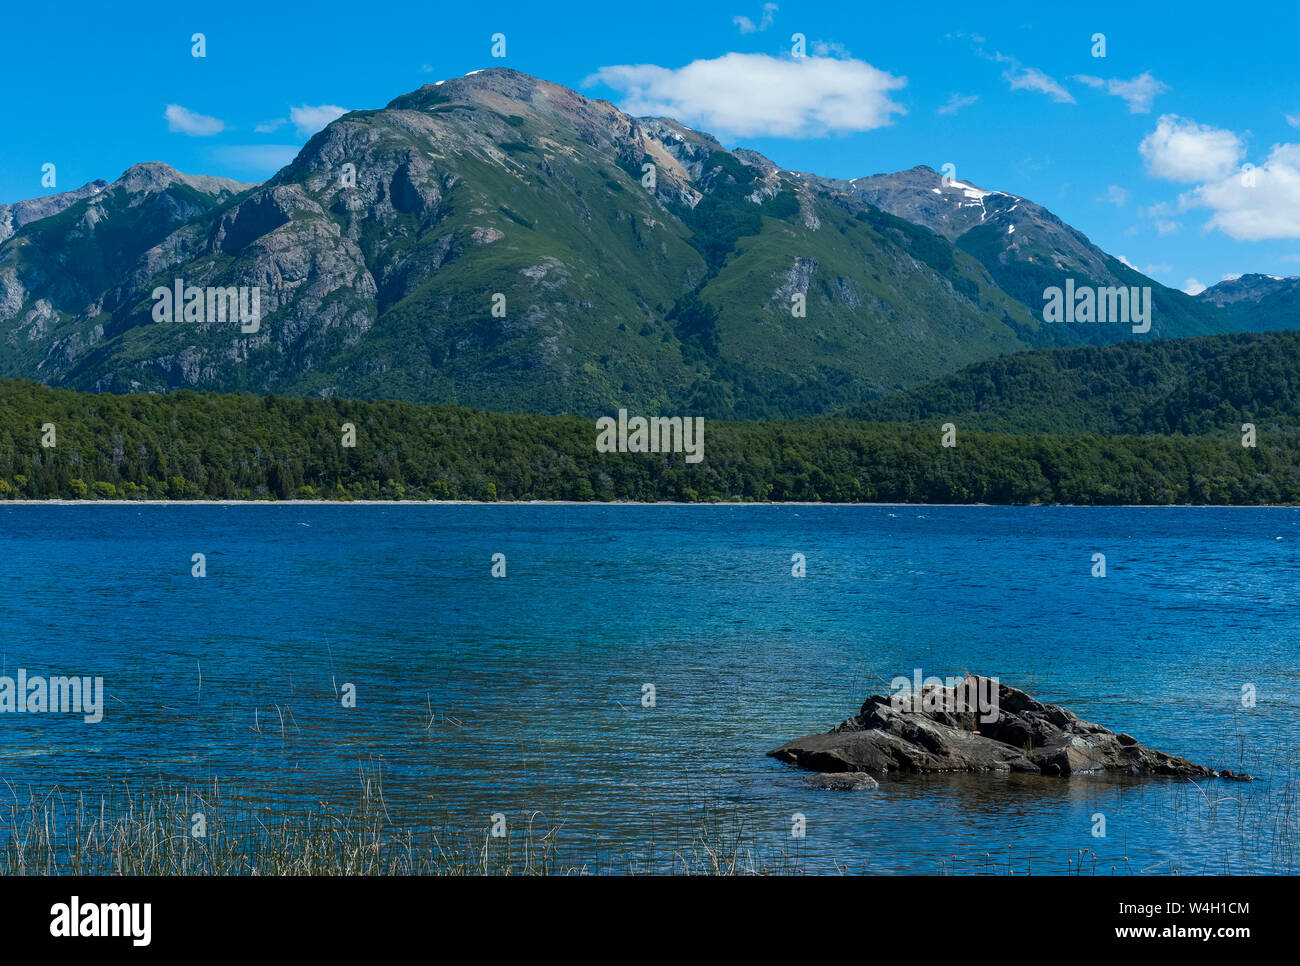 Beautiful mountain lake in the Los Alerces National Park, Chubut, Argentina, South America Stock Photo